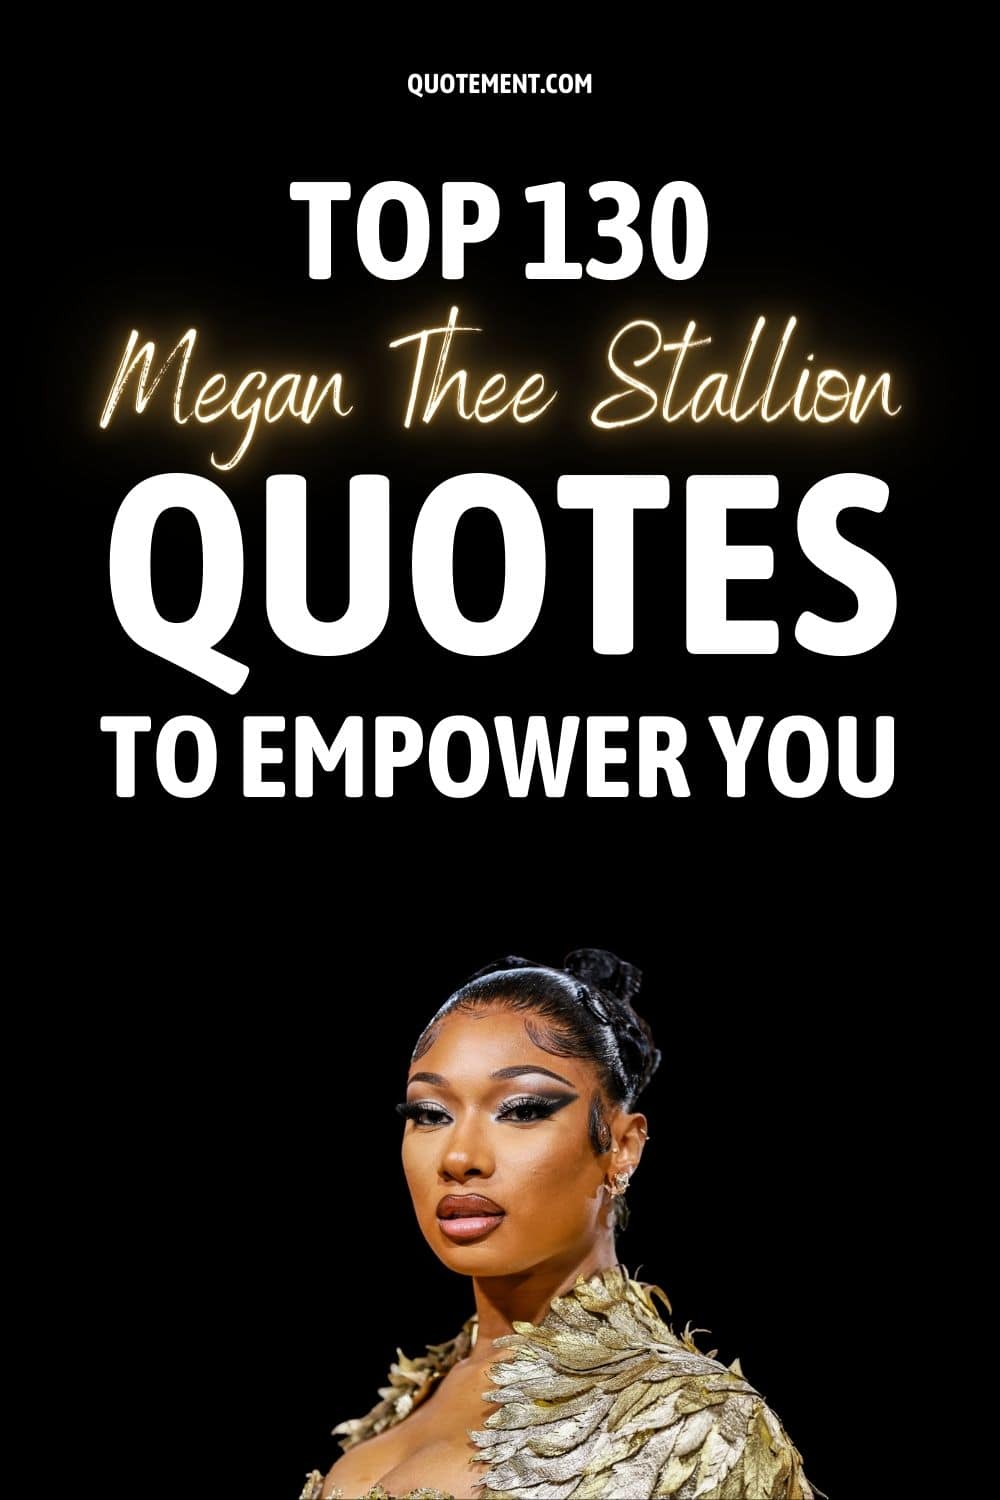 Top 130 Megan Thee Stallion Quotes To Empower You
